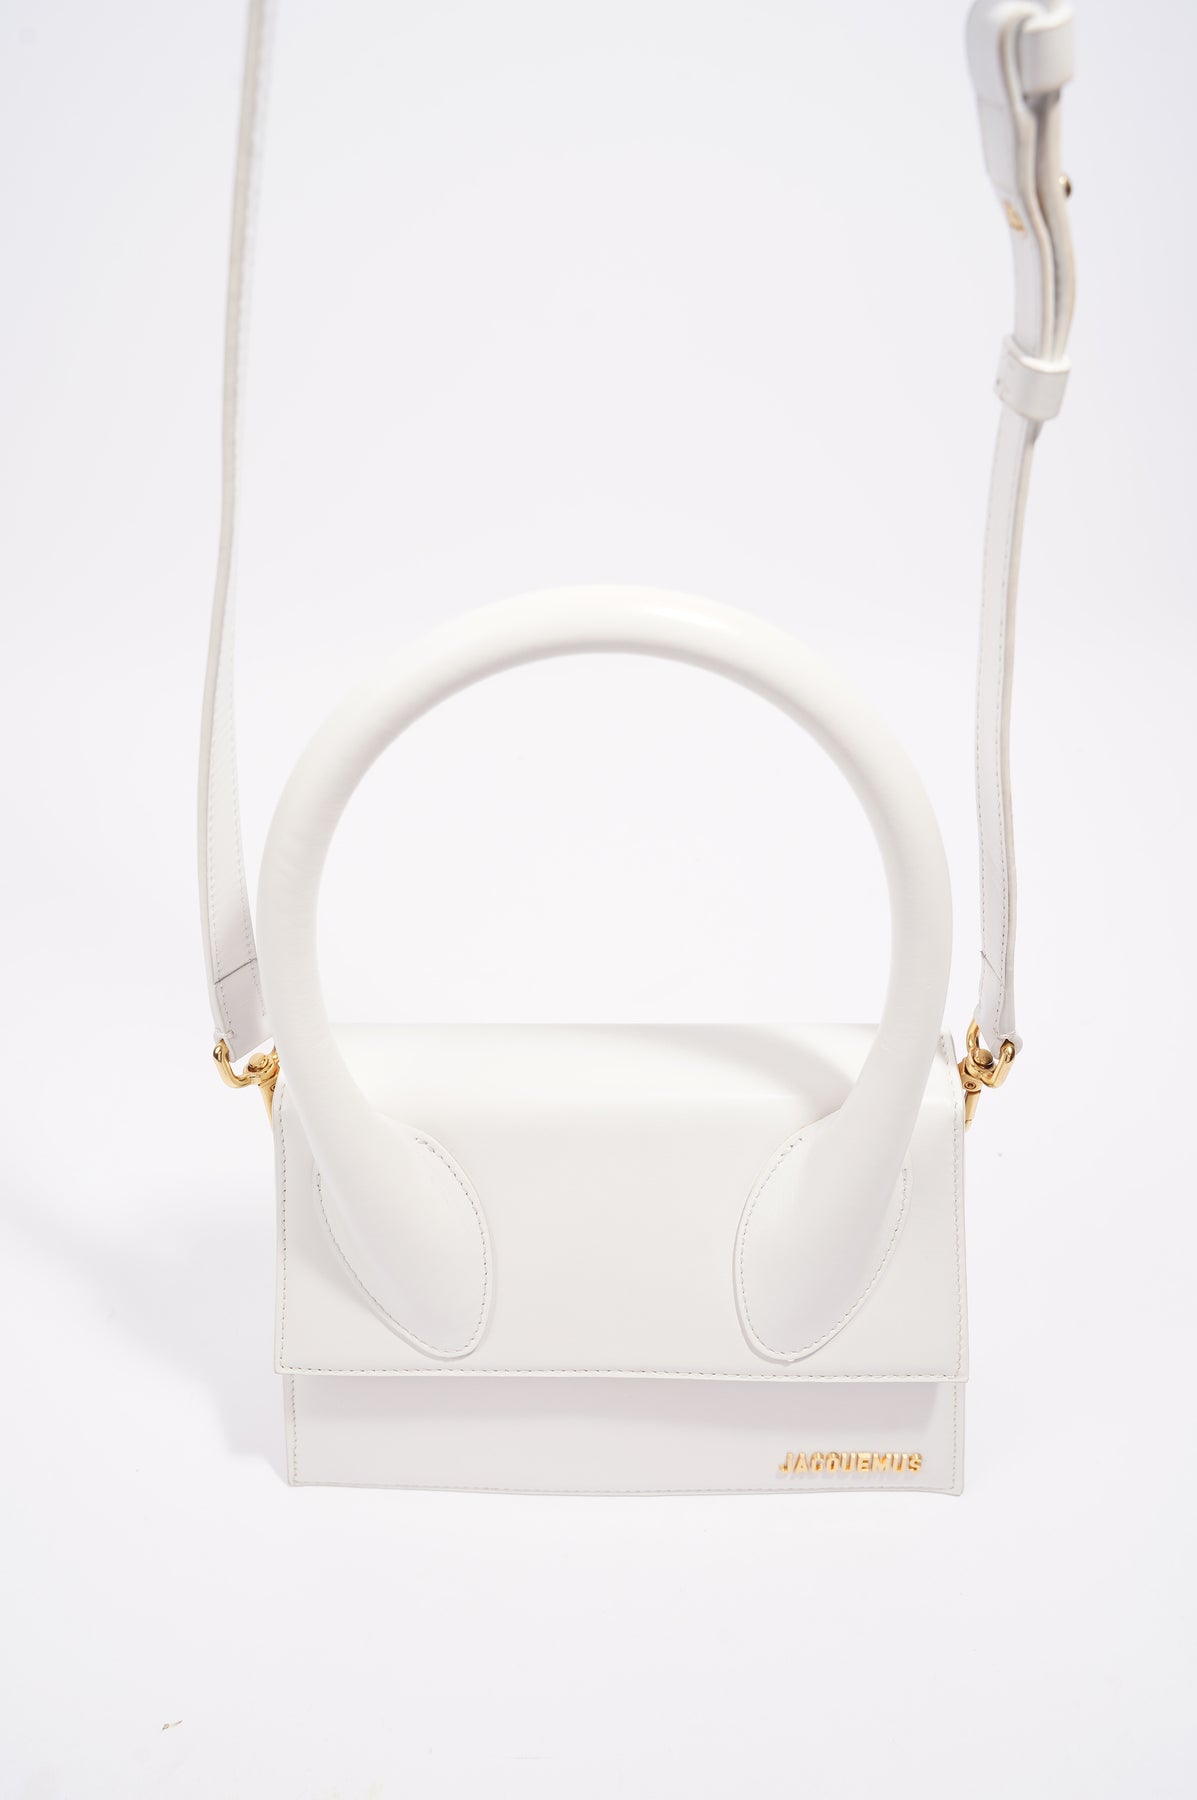 Jacquemus Womens Le Grand Chiquito Bag White Leather – Luxe Collective